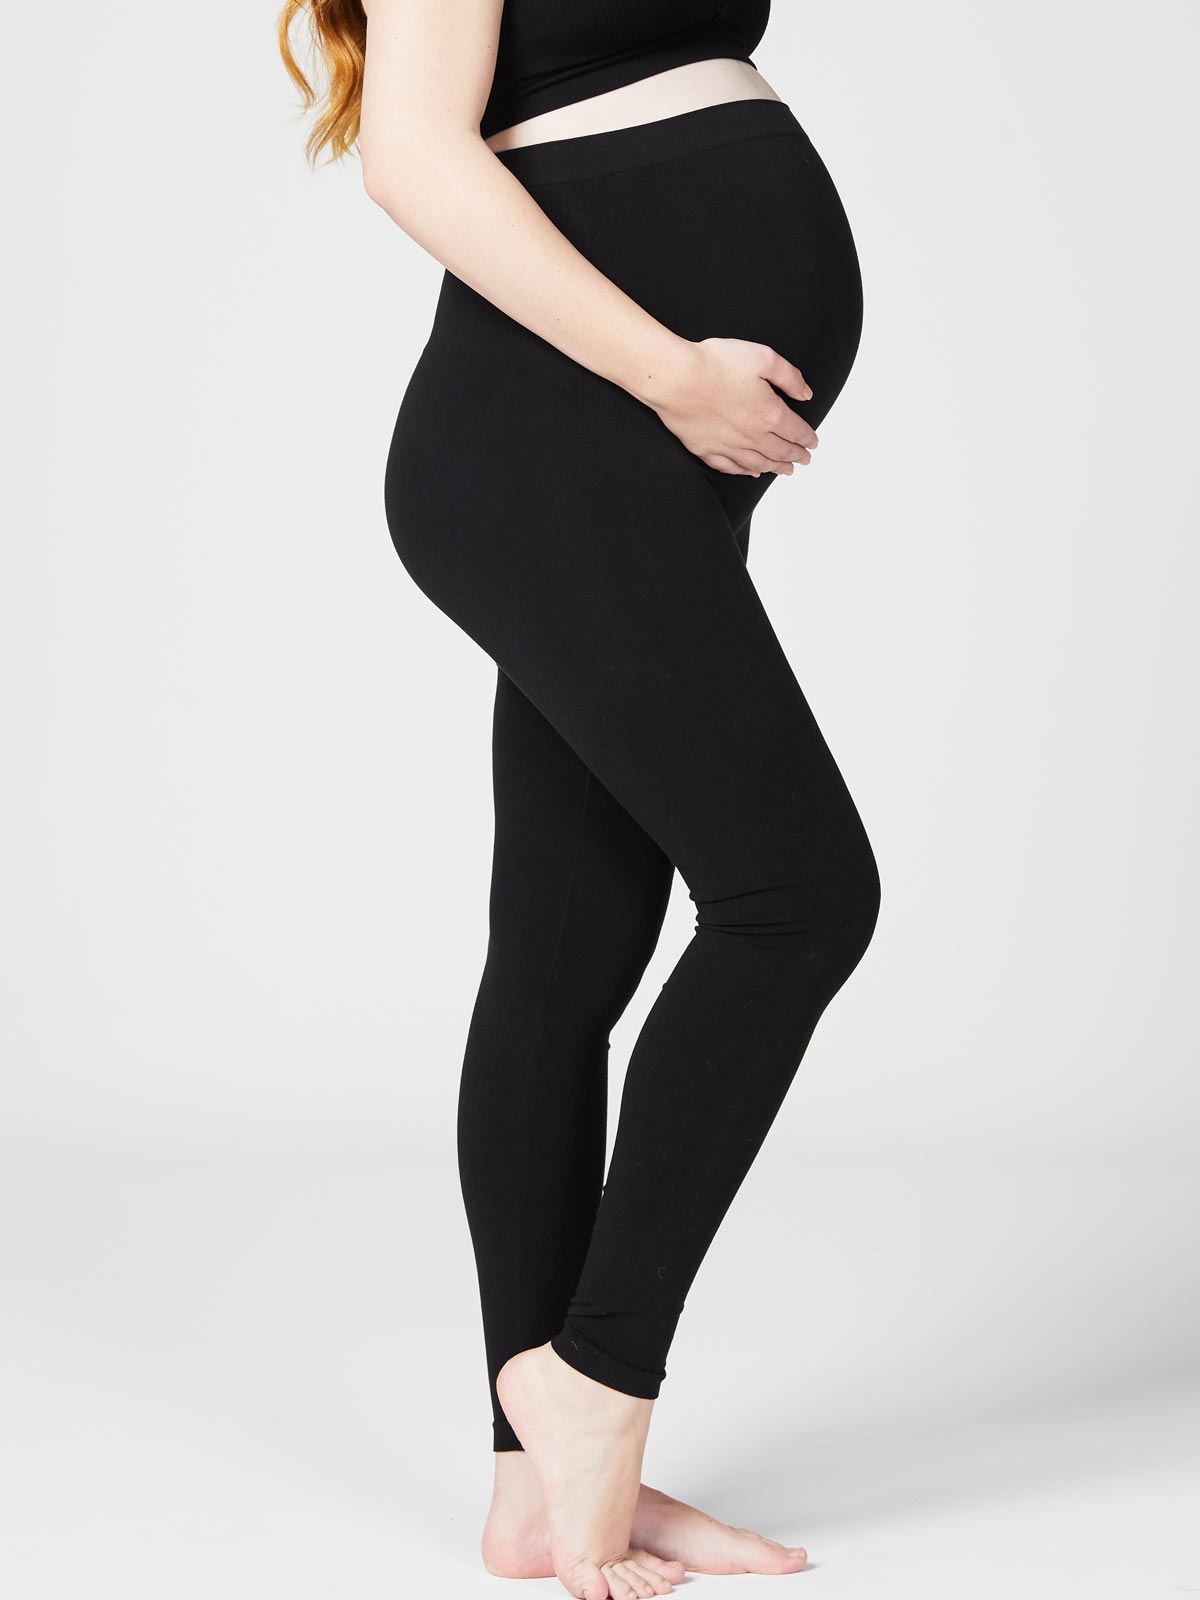 Strong compression bodyeffect leggings by intimidea (black), Maternity  clothes